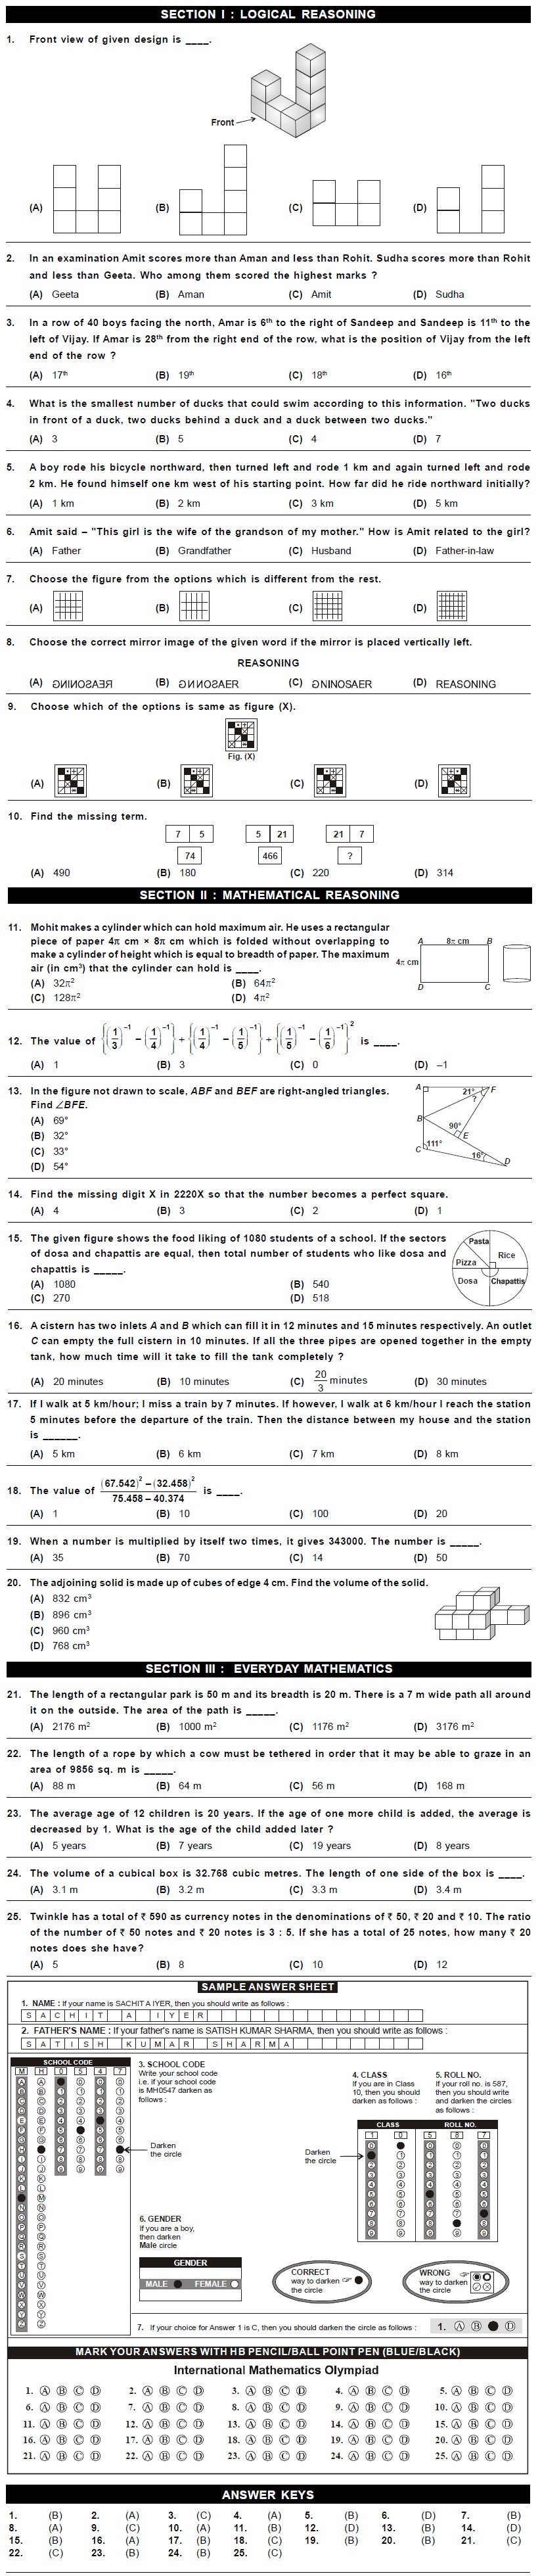 IMO 2nd Level Sample Papers - Class 8